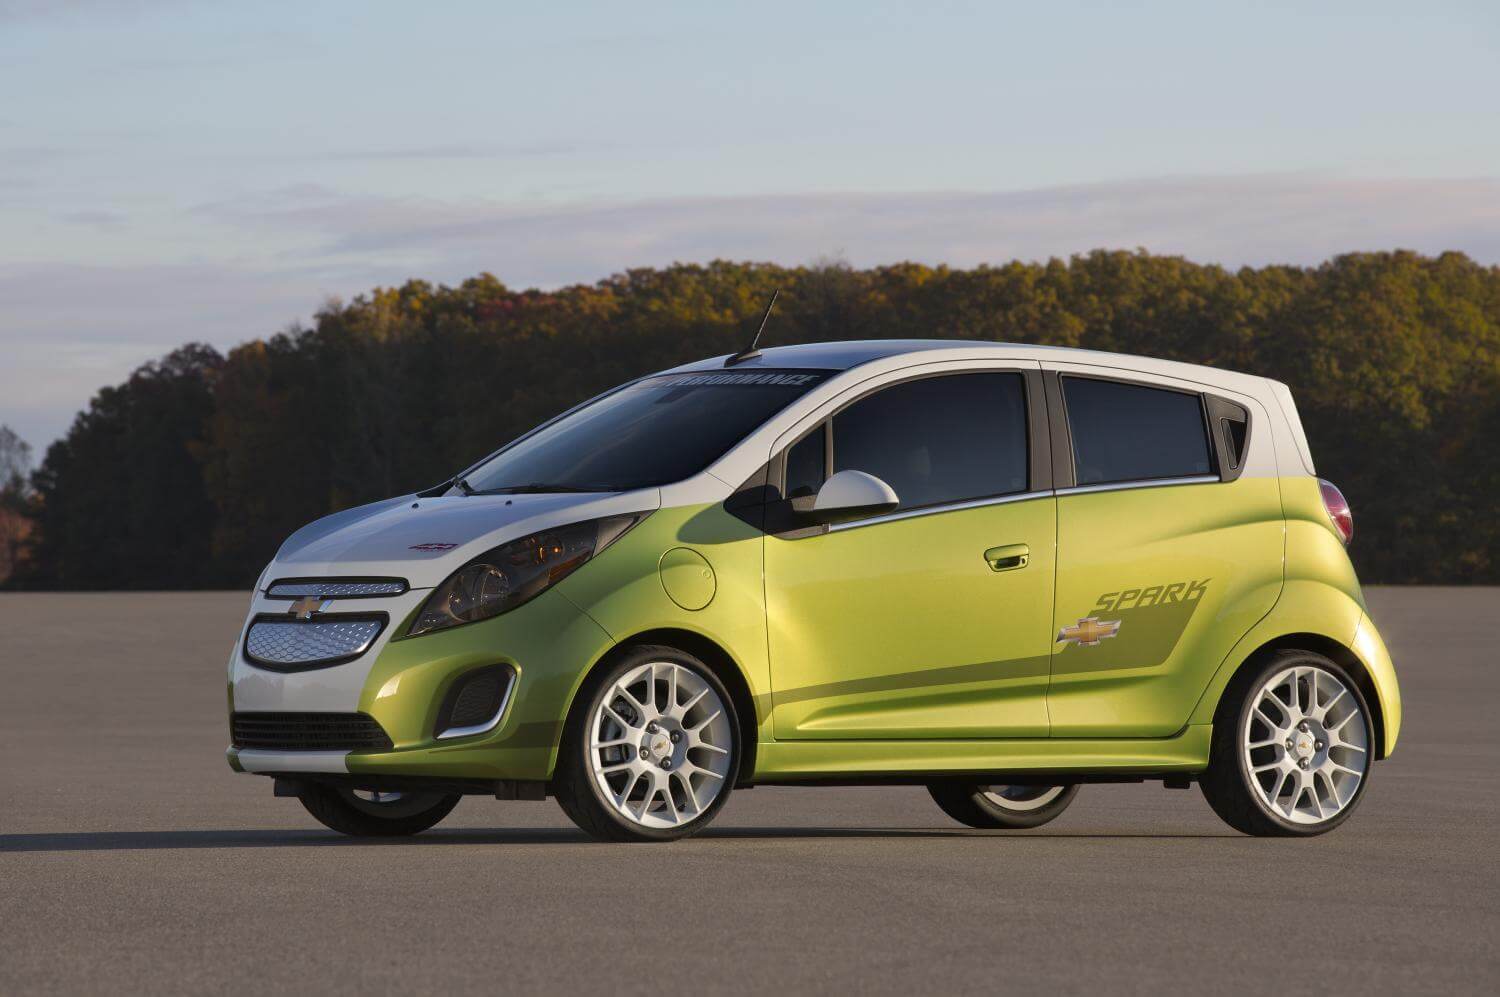 List of Cheapest Electric Cars: That will Help You in Saving